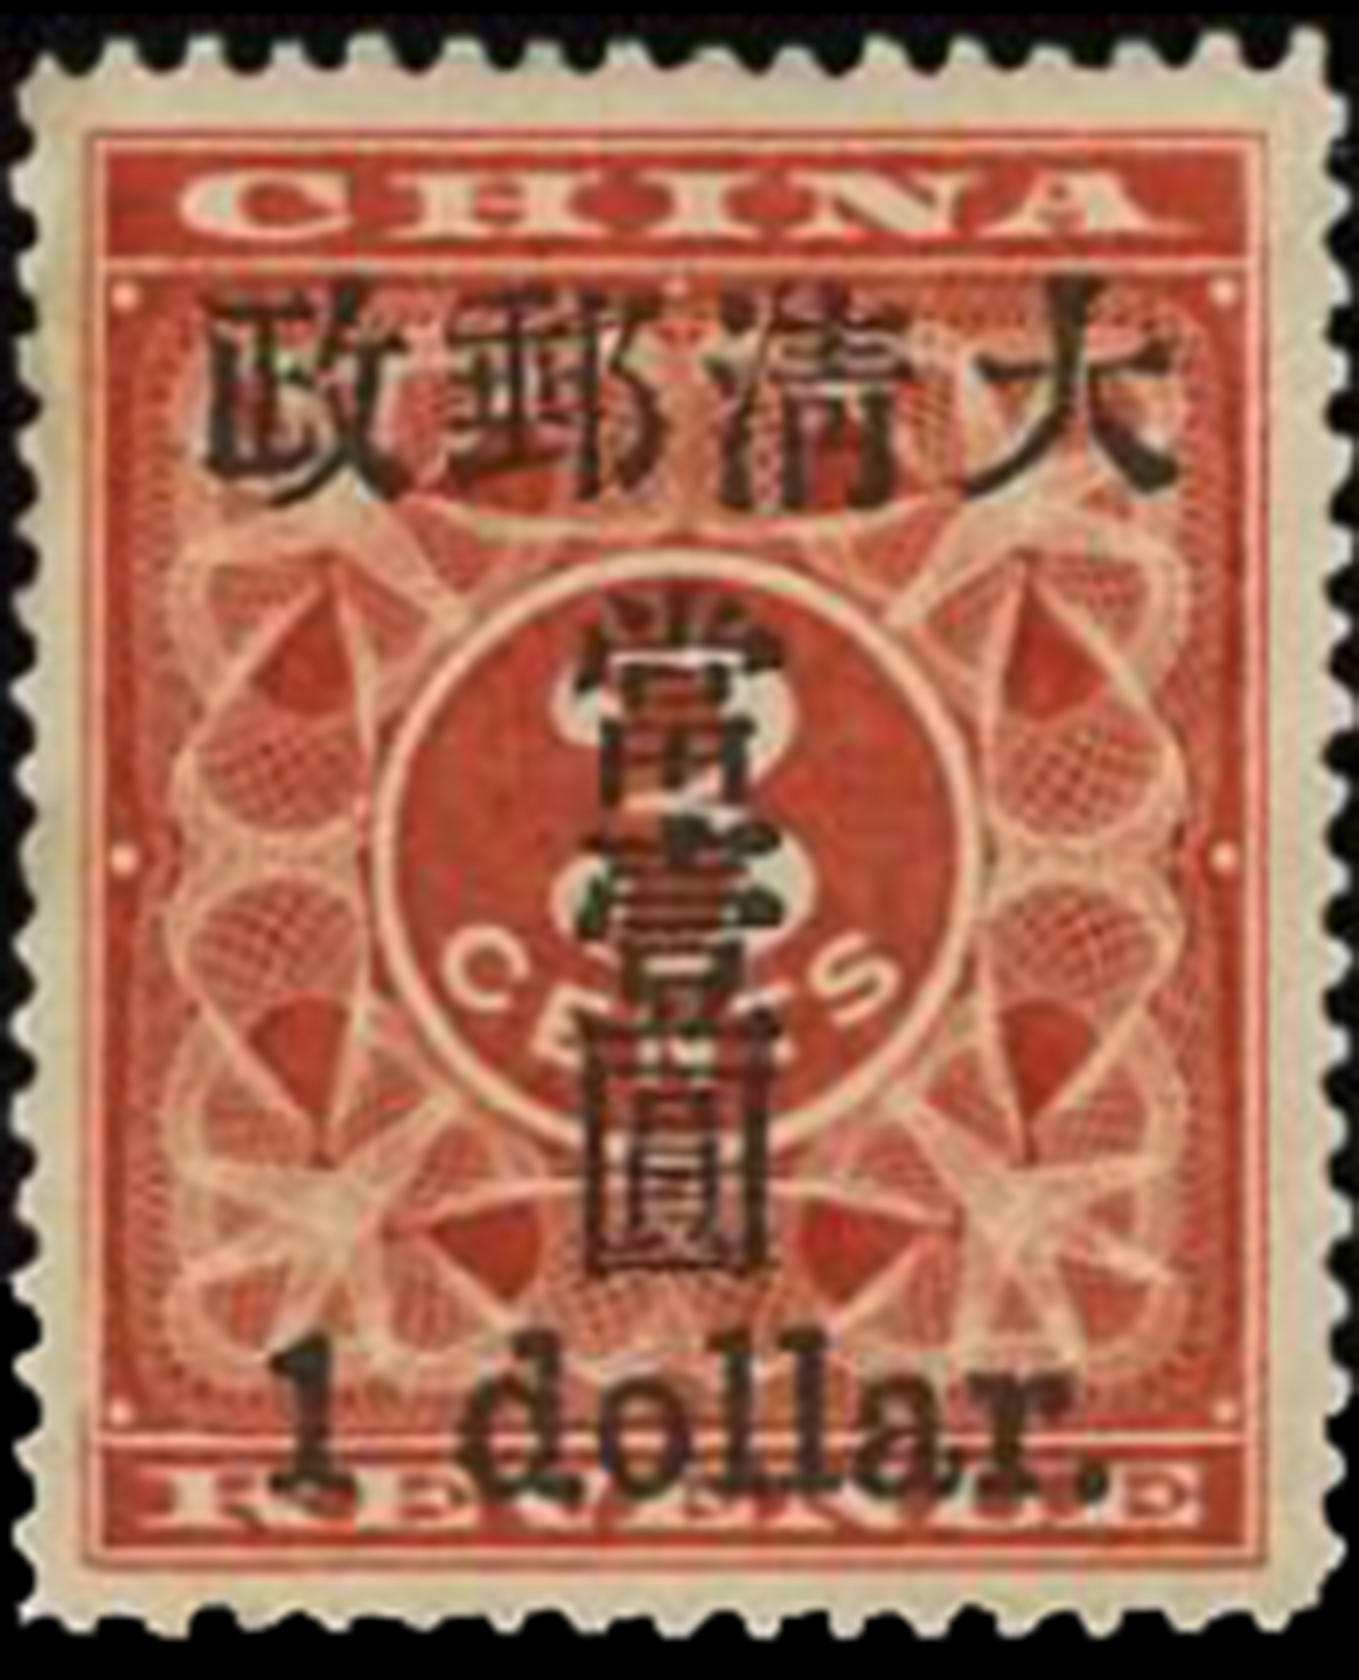 Up for sale: the 1897 stamp